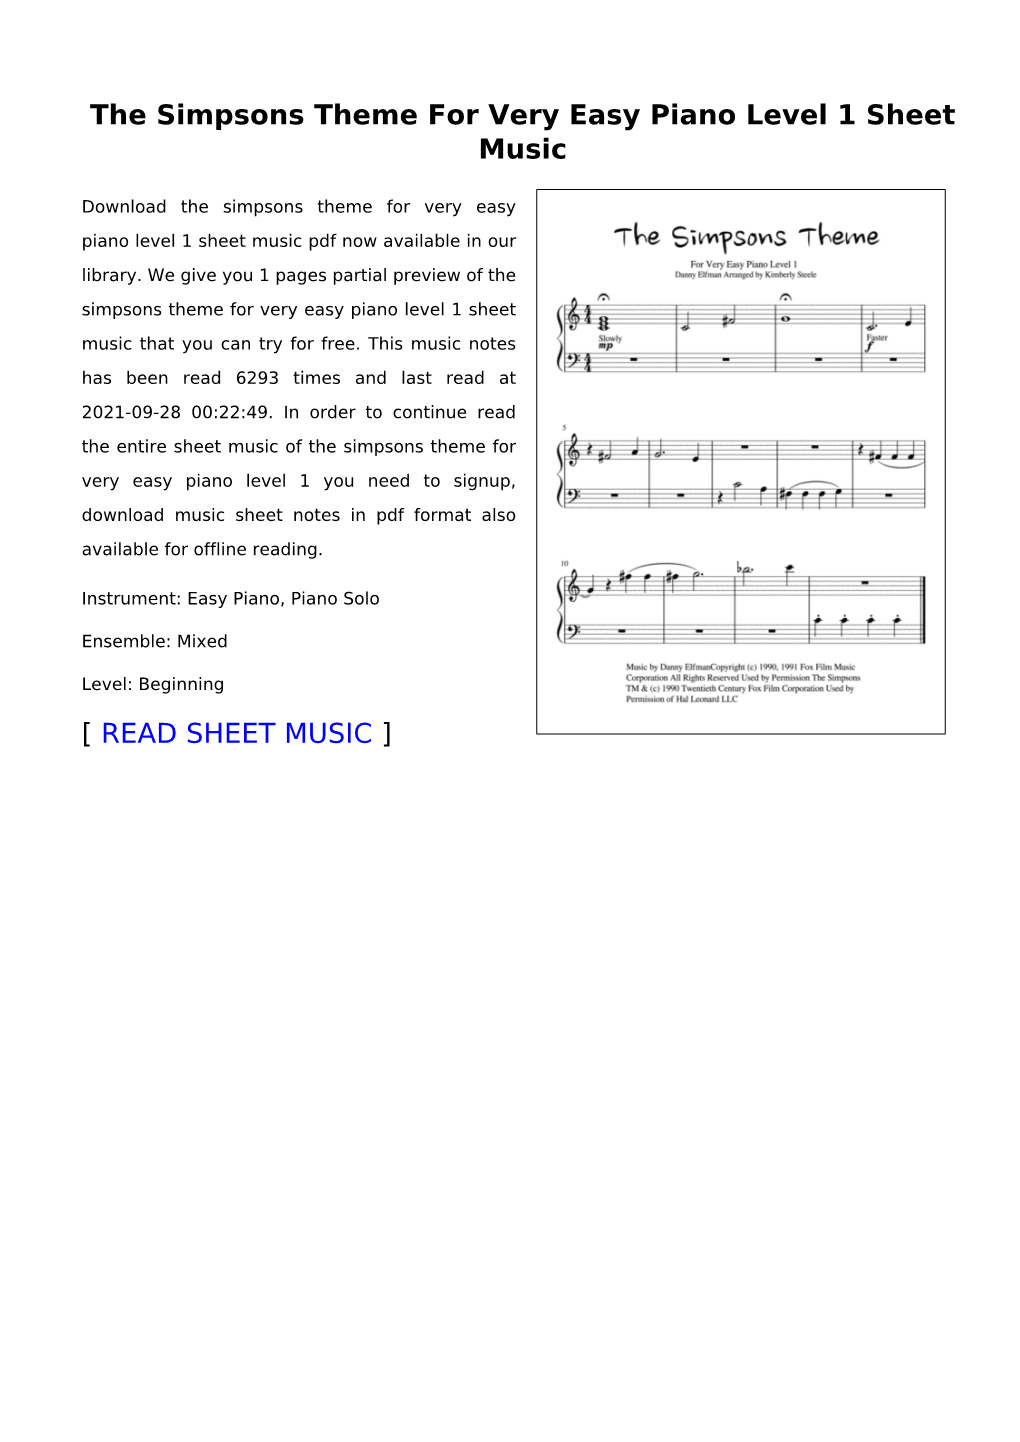 The Simpsons Theme for Very Easy Piano Level 1 Sheet Music